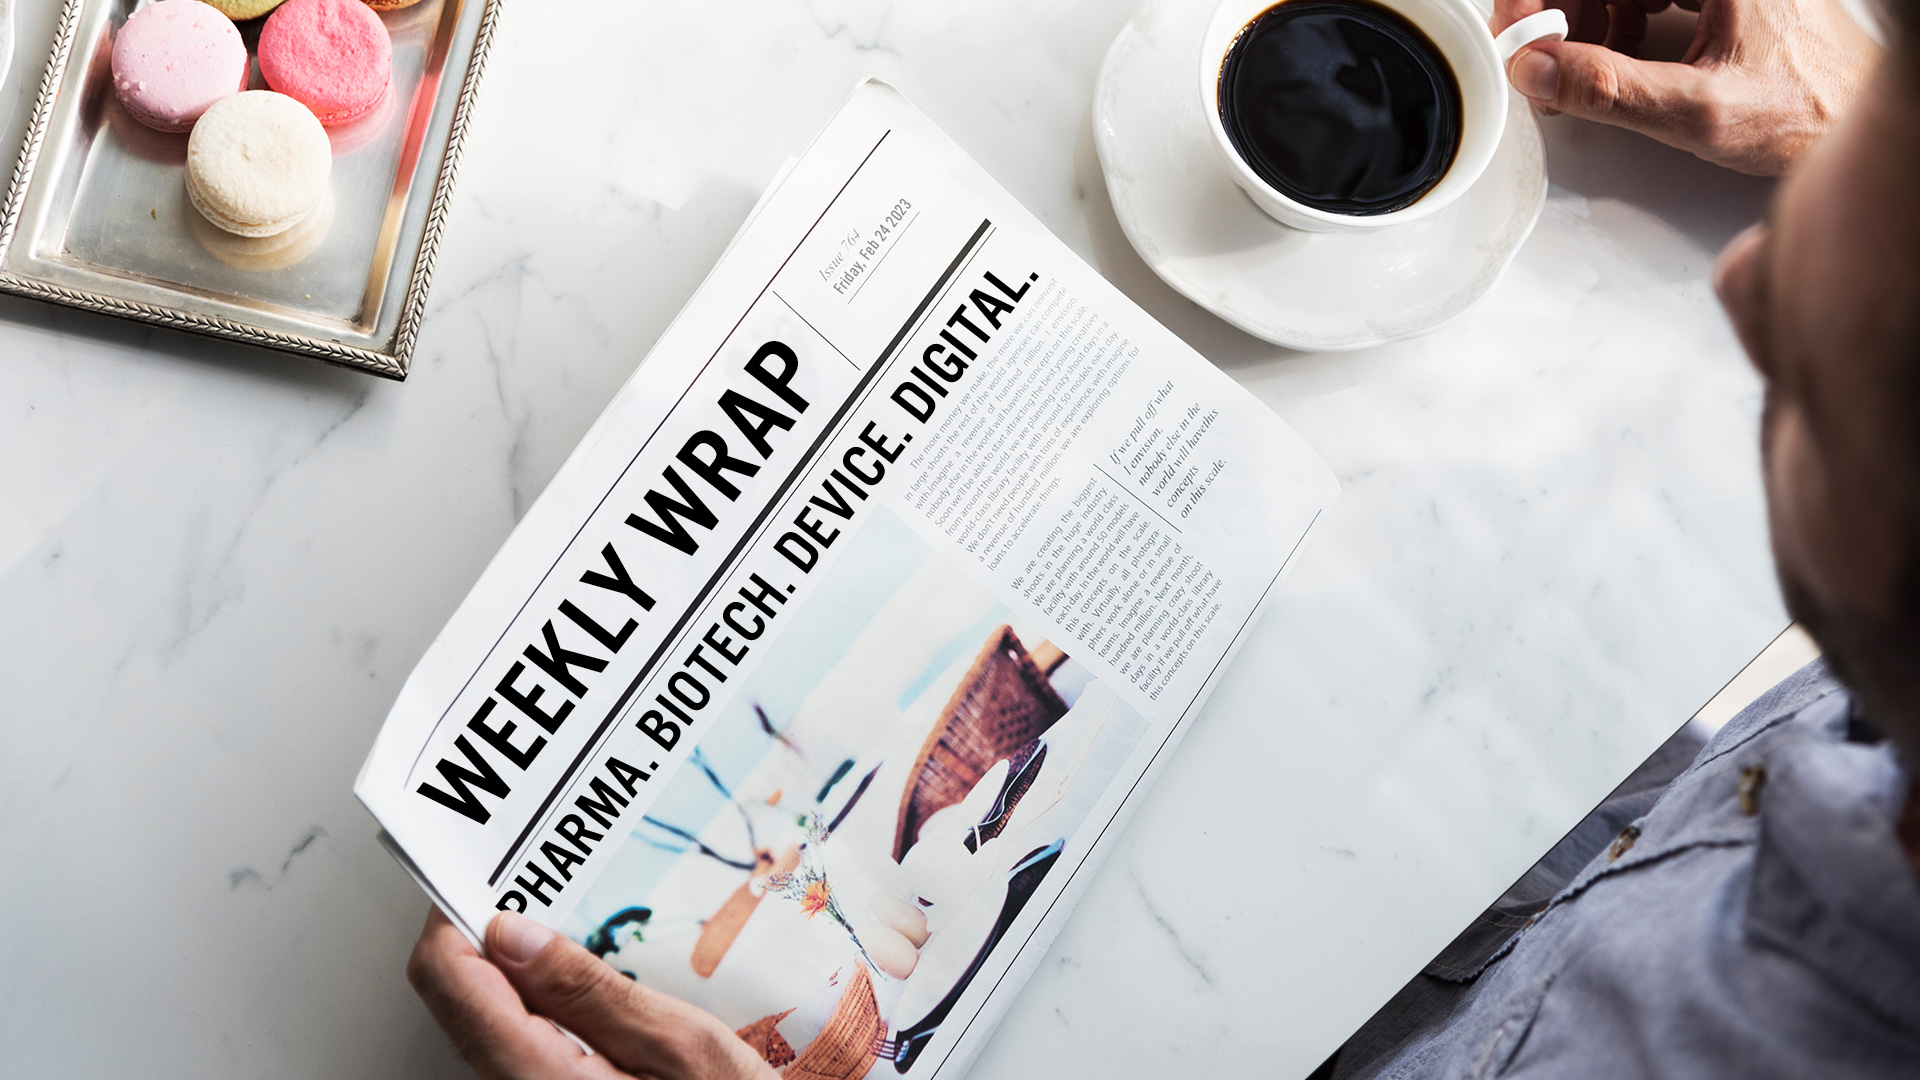 Healthcare Industry News Weekly Wrap-Up: February 24, 2023